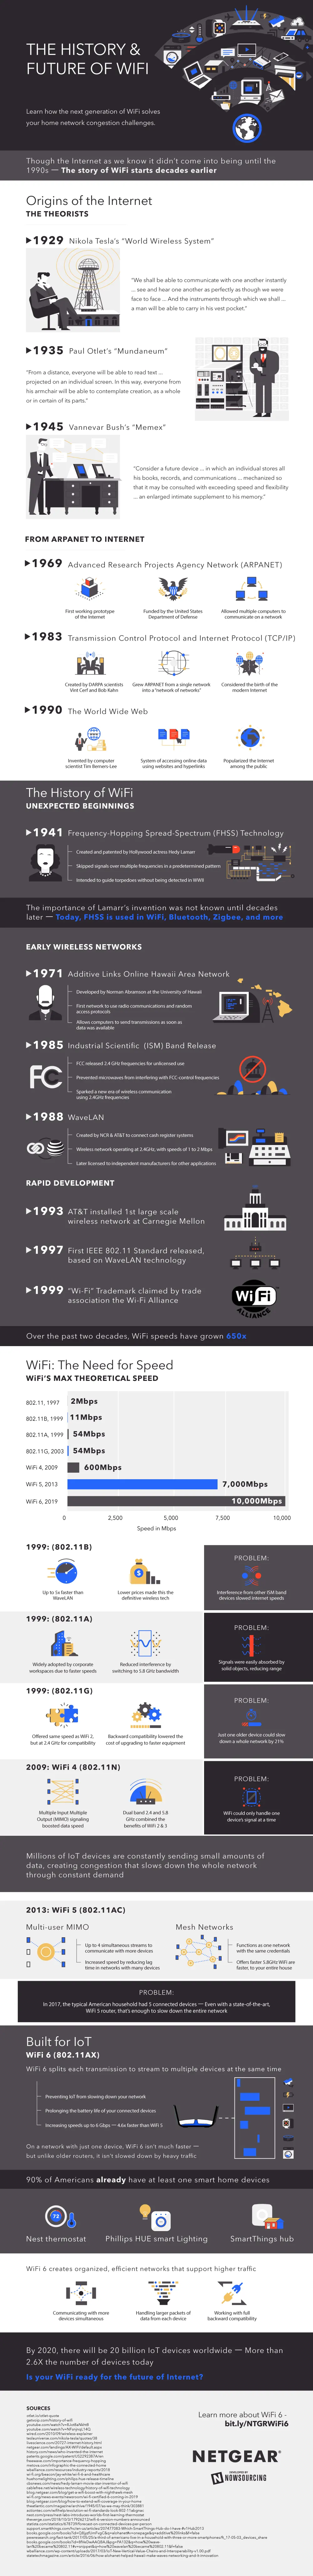 The History & Future of WiFi